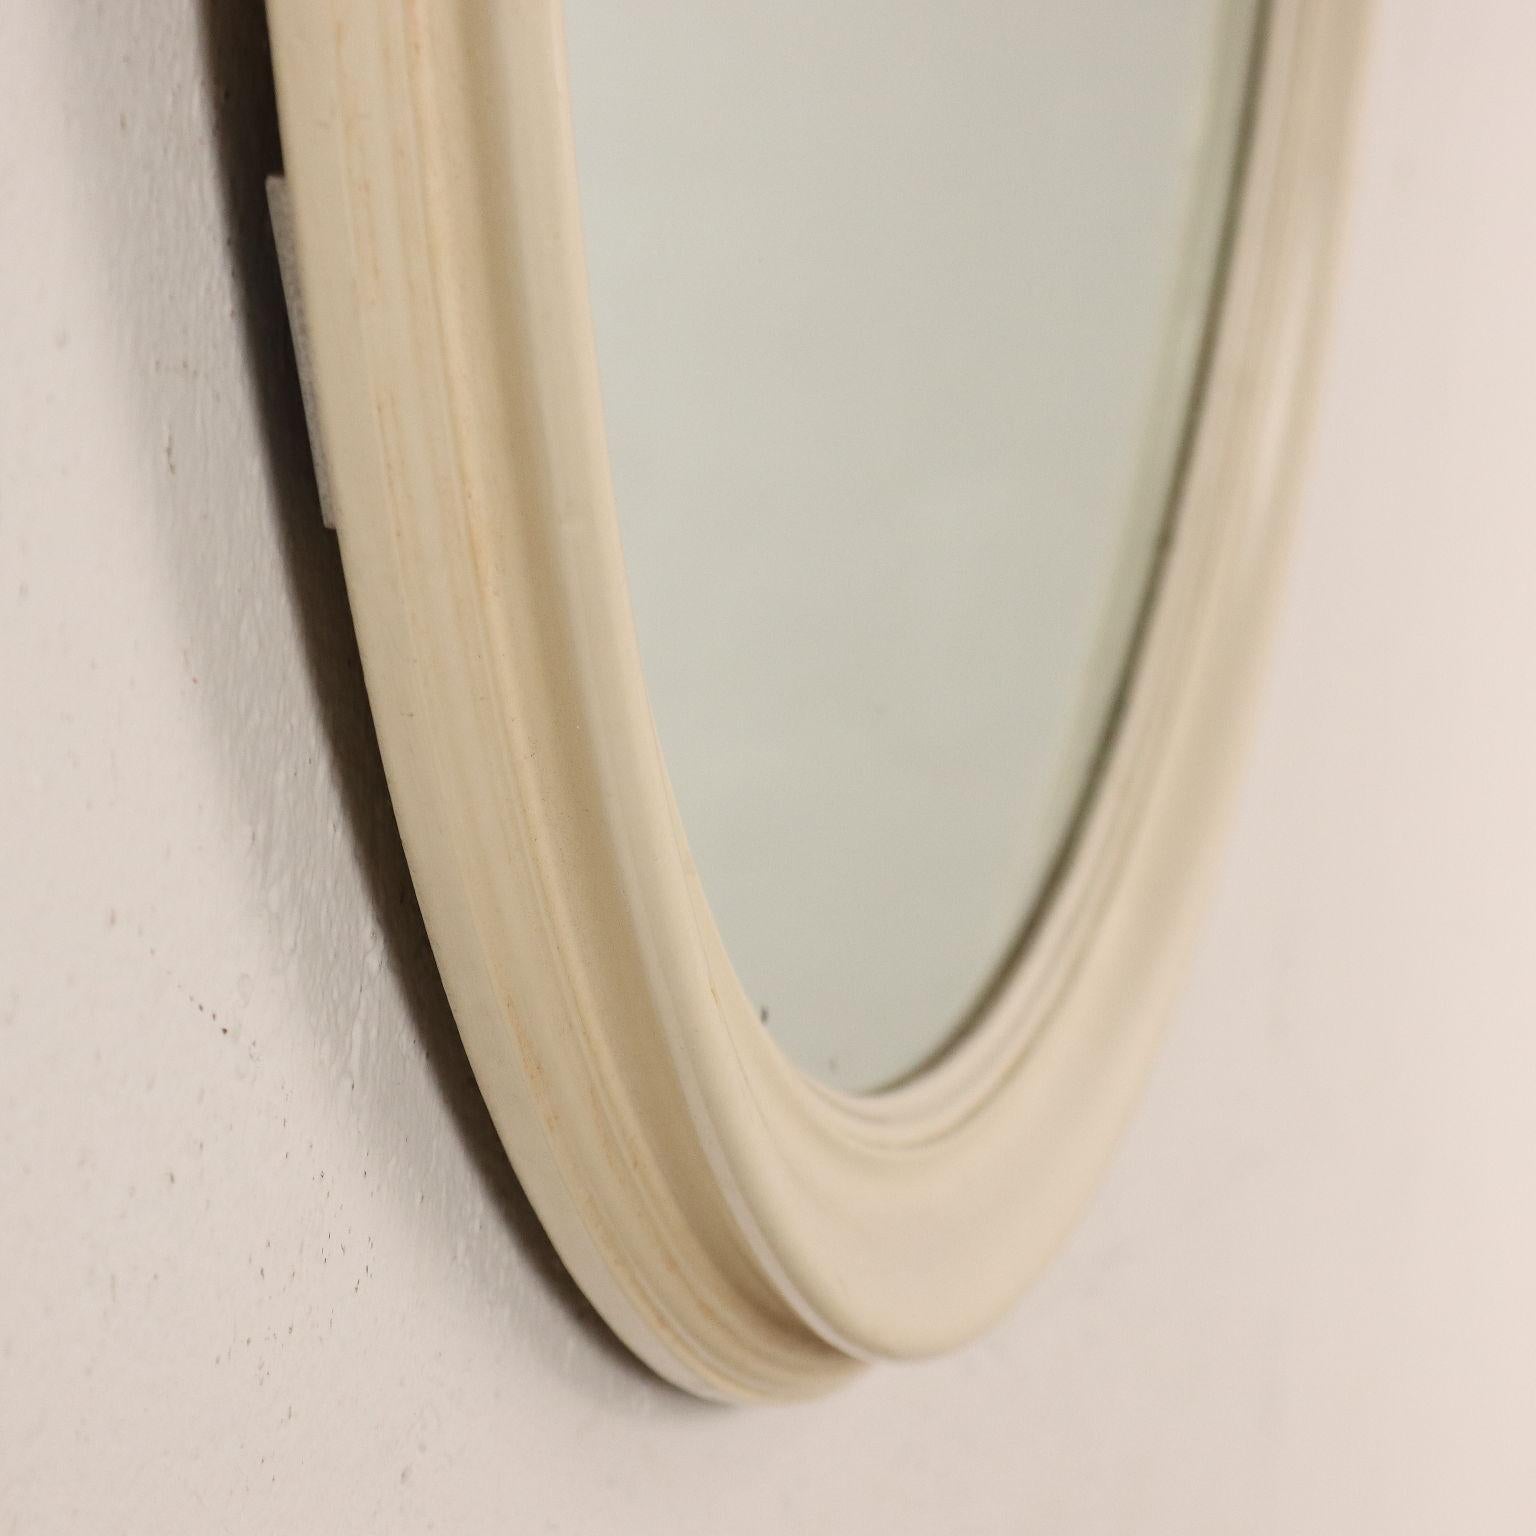 Vintage Mirror Years 60-70 Enameled Wood Frame In Good Condition For Sale In Milano, IT